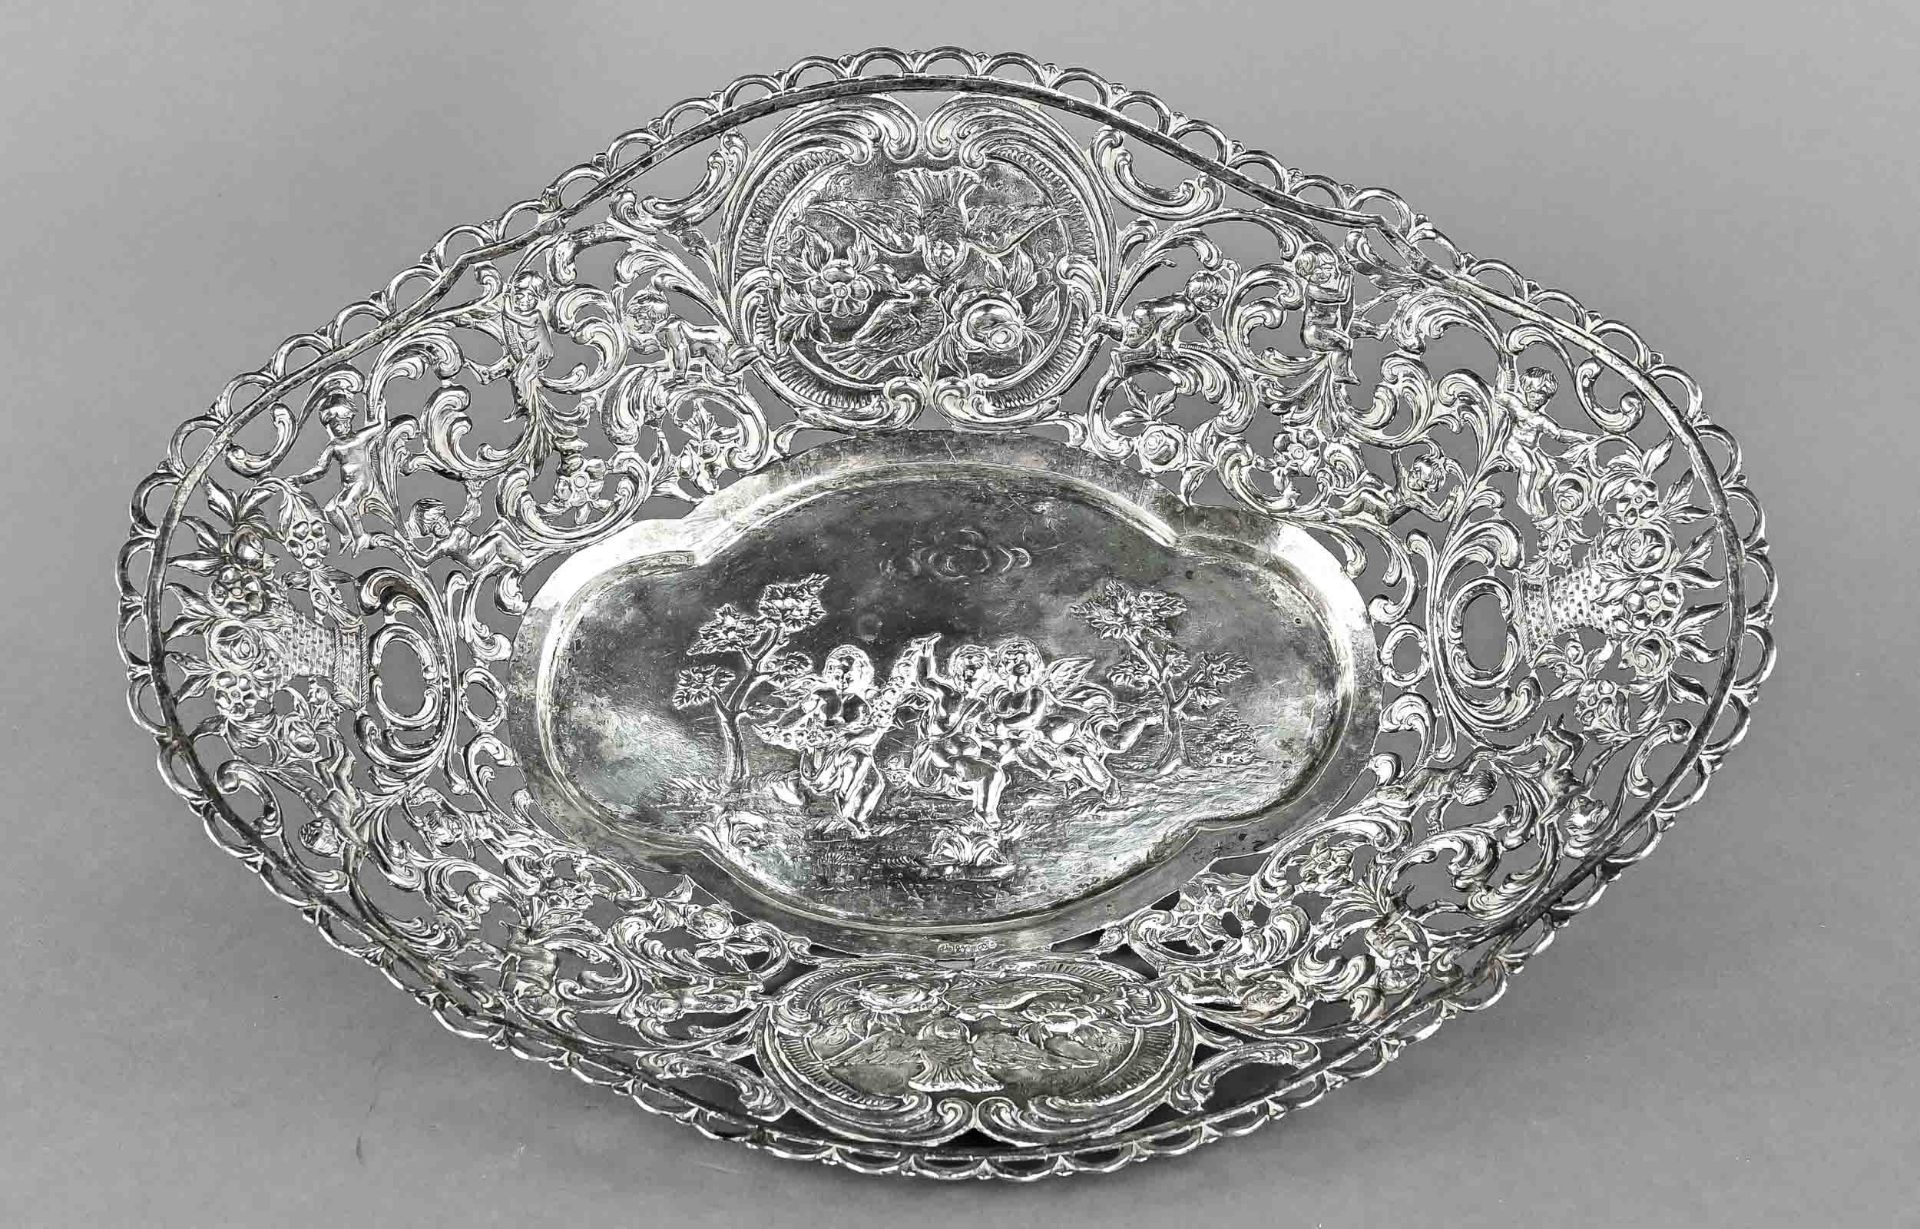 Large silver fruit bowl, Germany circa 1900, silver 800 hallmarked, mirror plastically decorated wi